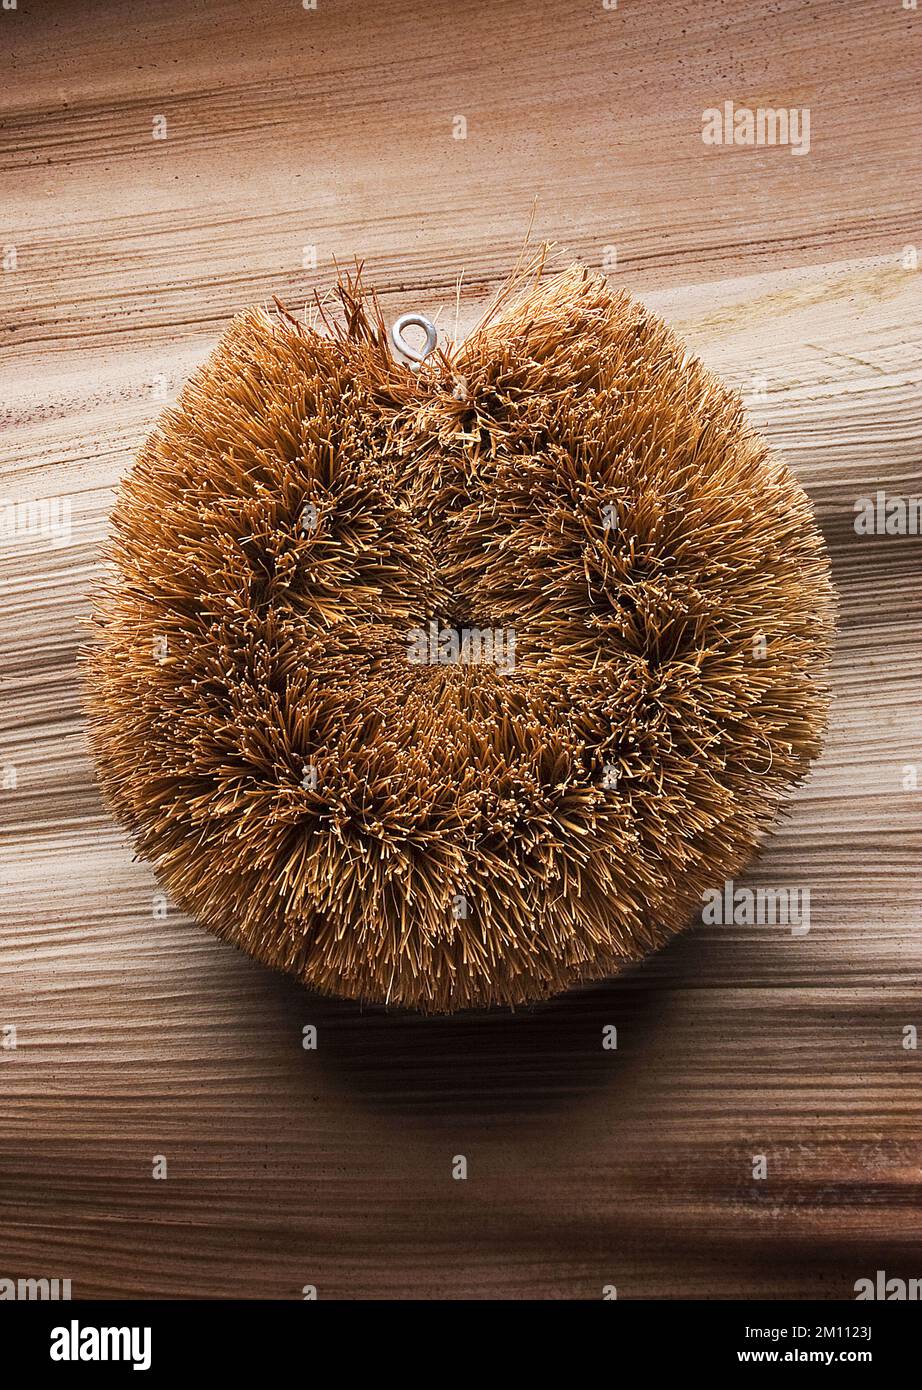 https://c8.alamy.com/comp/2M1123J/natural-coconut-fiber-cleaning-brush-brazilian-coco-fibre-iobtained-from-the-fruit-of-the-coconut-palm-on-the-background-of-an-an-imperial-palm-leaf-2M1123J.jpg